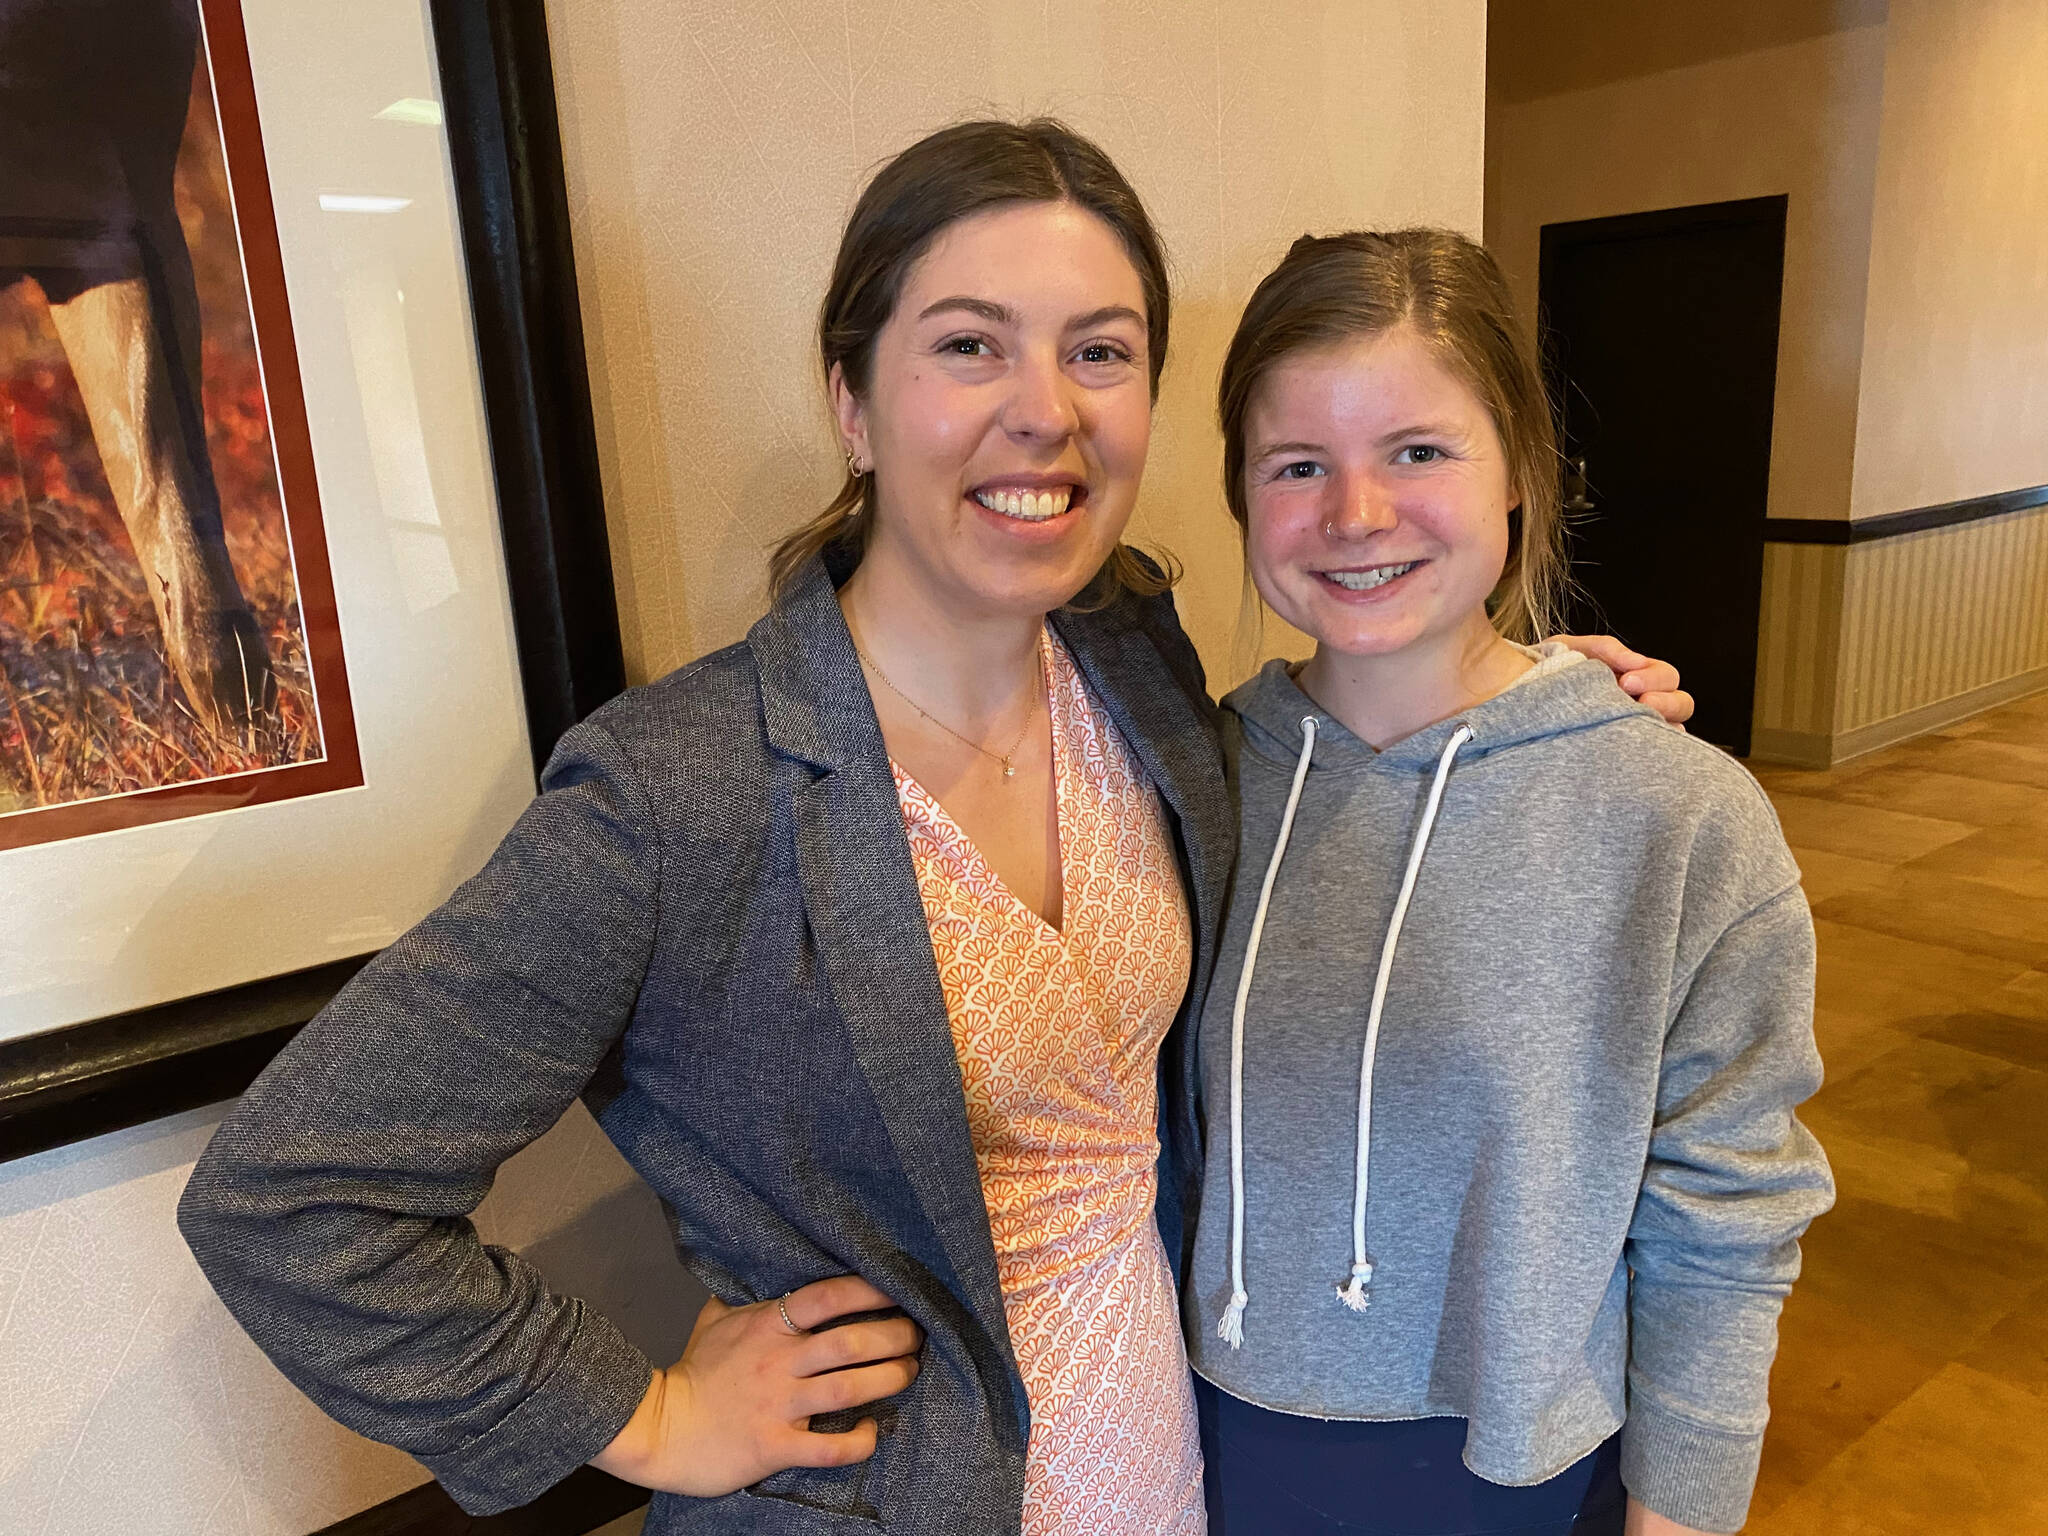 Izabelle Ith, left, stands with fellow 2023 ASAA Hall of Fame inductee Allie Ostrander, right on Sunday at the Hall of Fame induction ceremony in Anchorage, Sunday. (Courtesy Photo / Tommy Thompson)